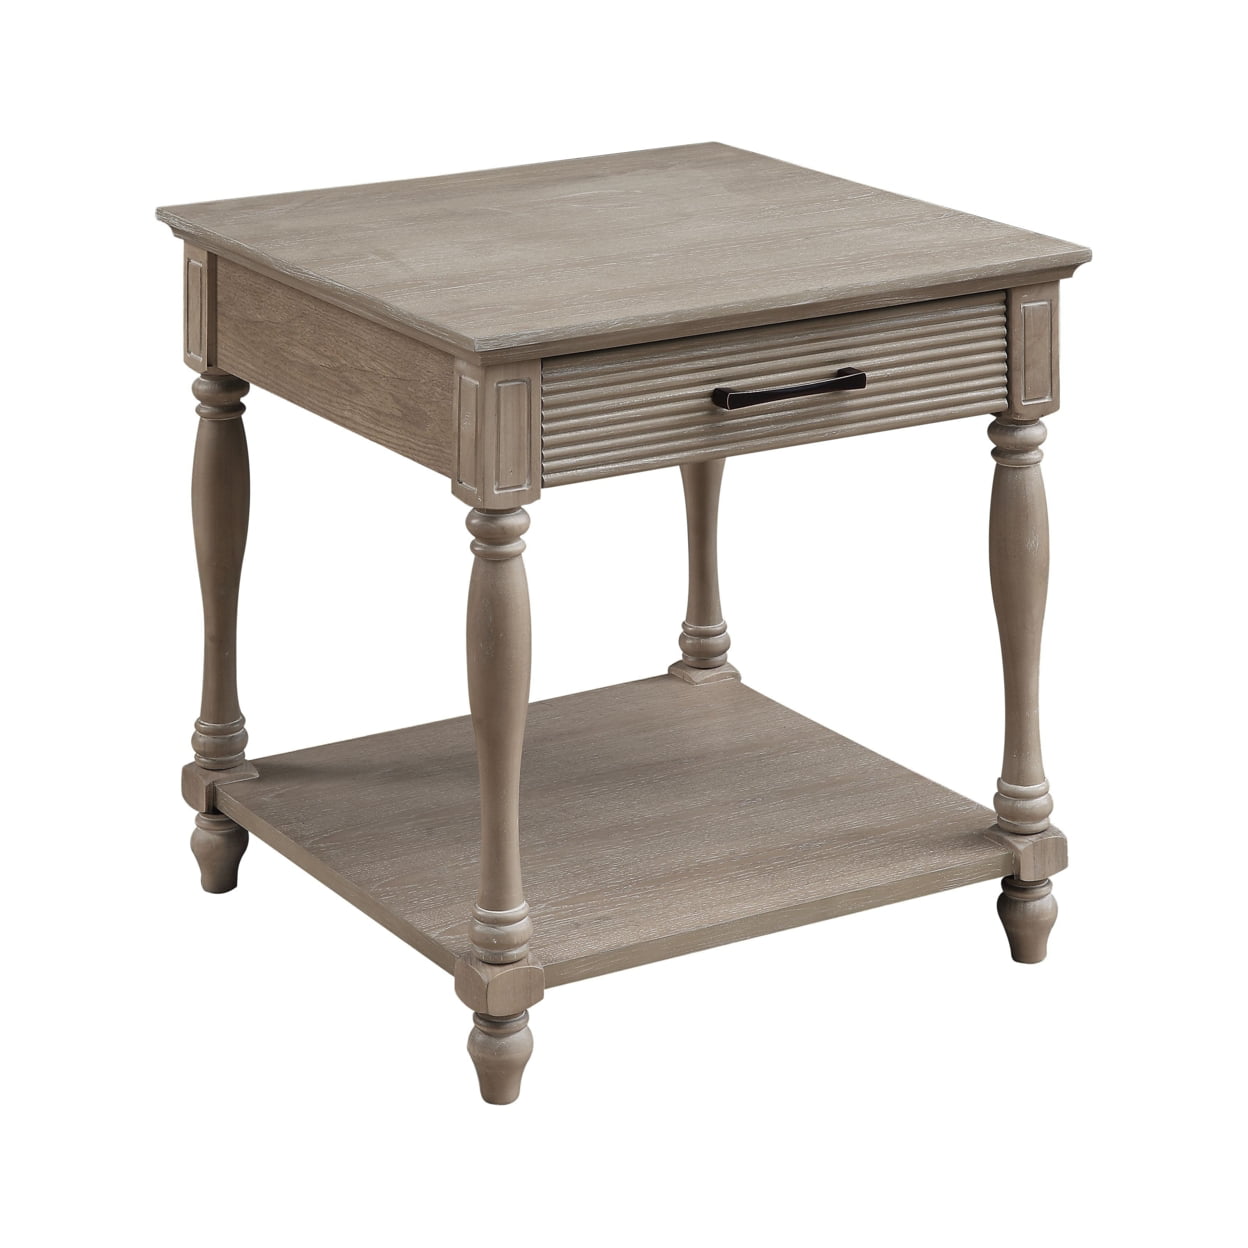 Picture of Benjara BM211092 Wooden End Table with 1 Drawer & Molded Design - Antique White - 24 x 24 x 24 in.